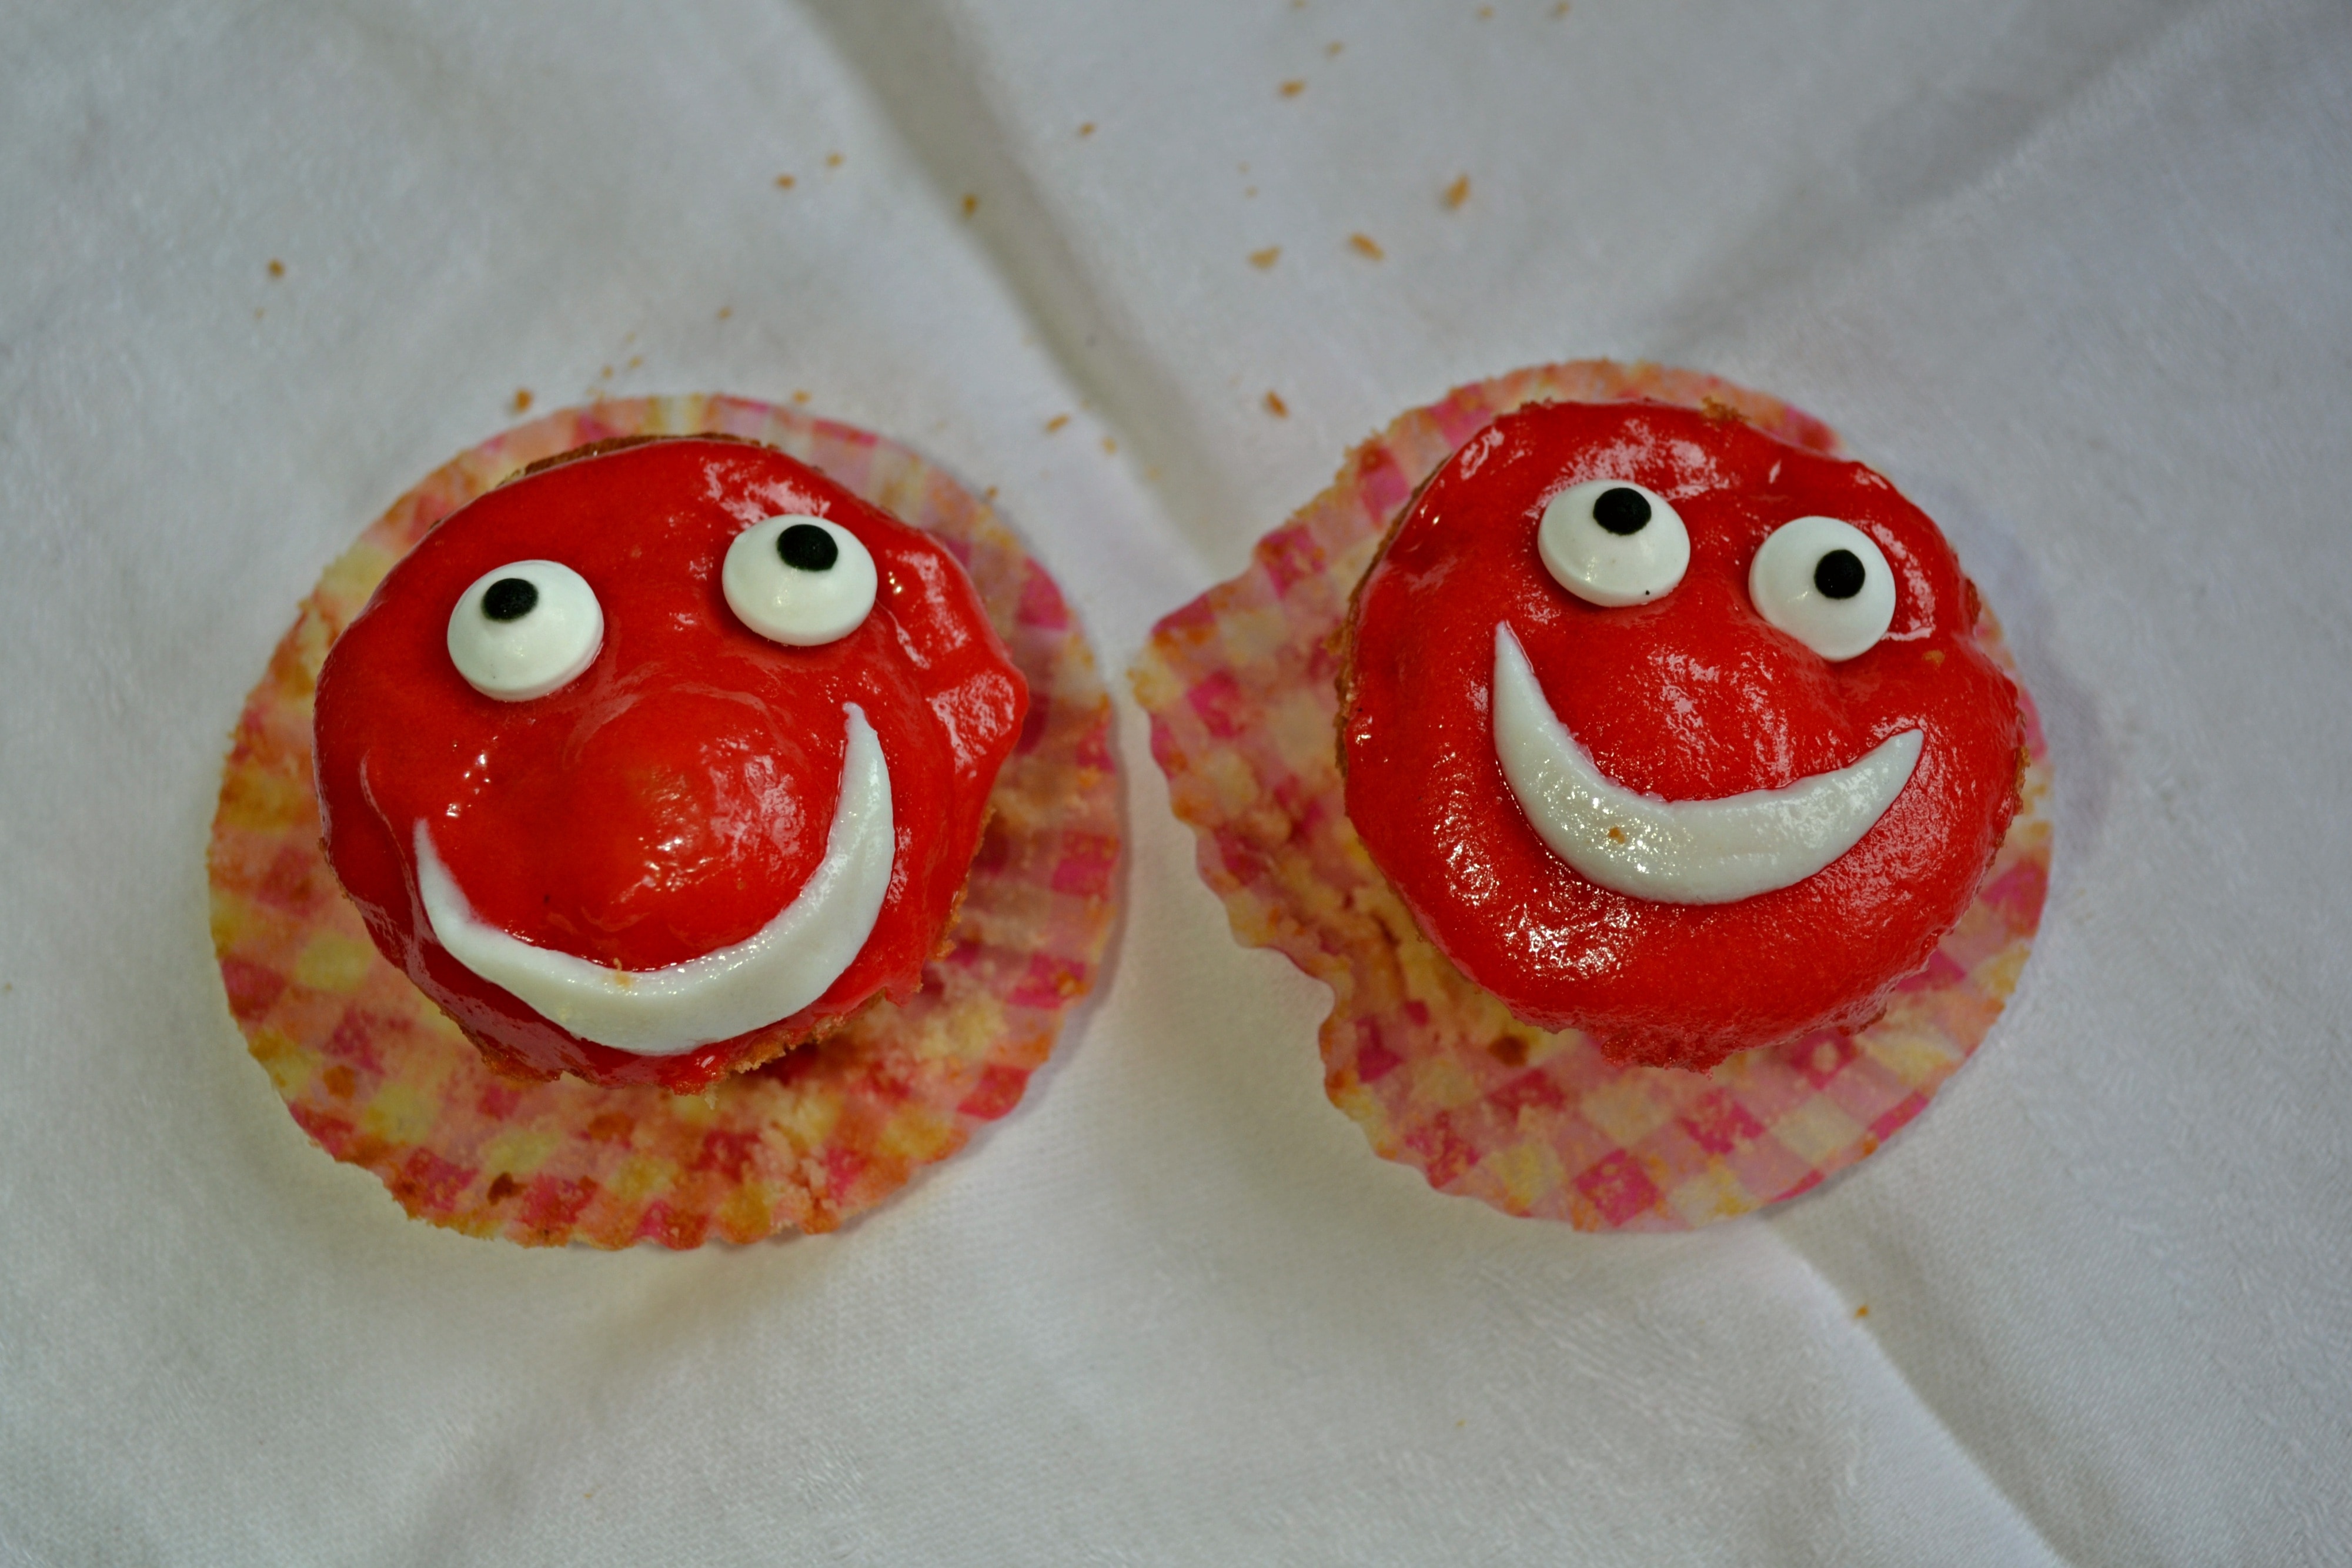 2 red-and-white cupcakes